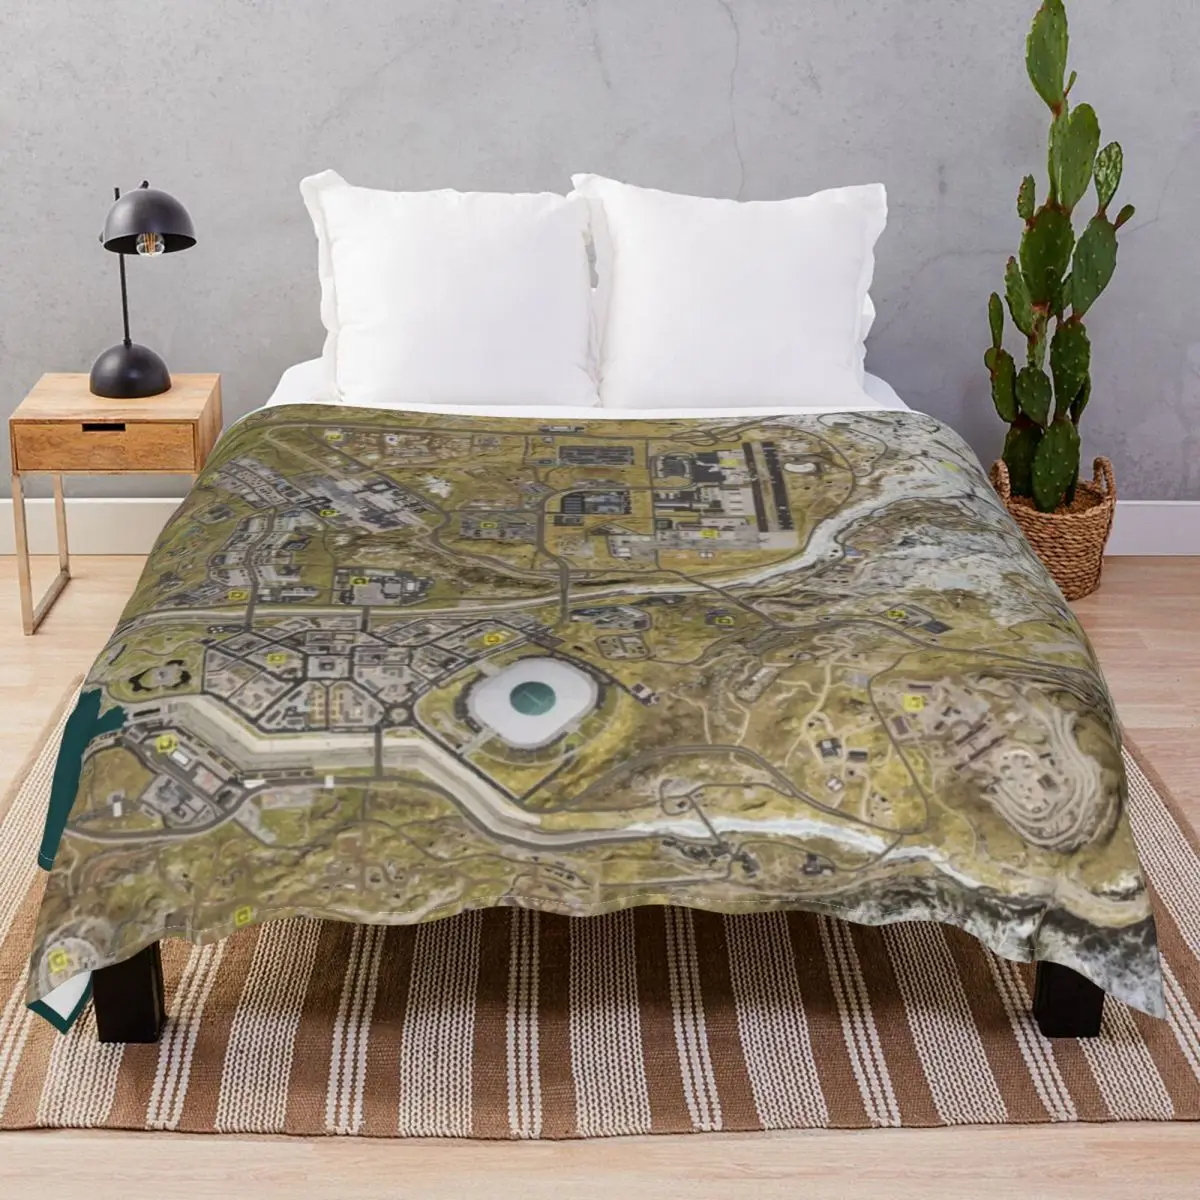 COD WARZONE MAP Blanket Flannel Autumn/Winter Multifunction Throw Blankets for Bedding Home Couch Travel Cinema